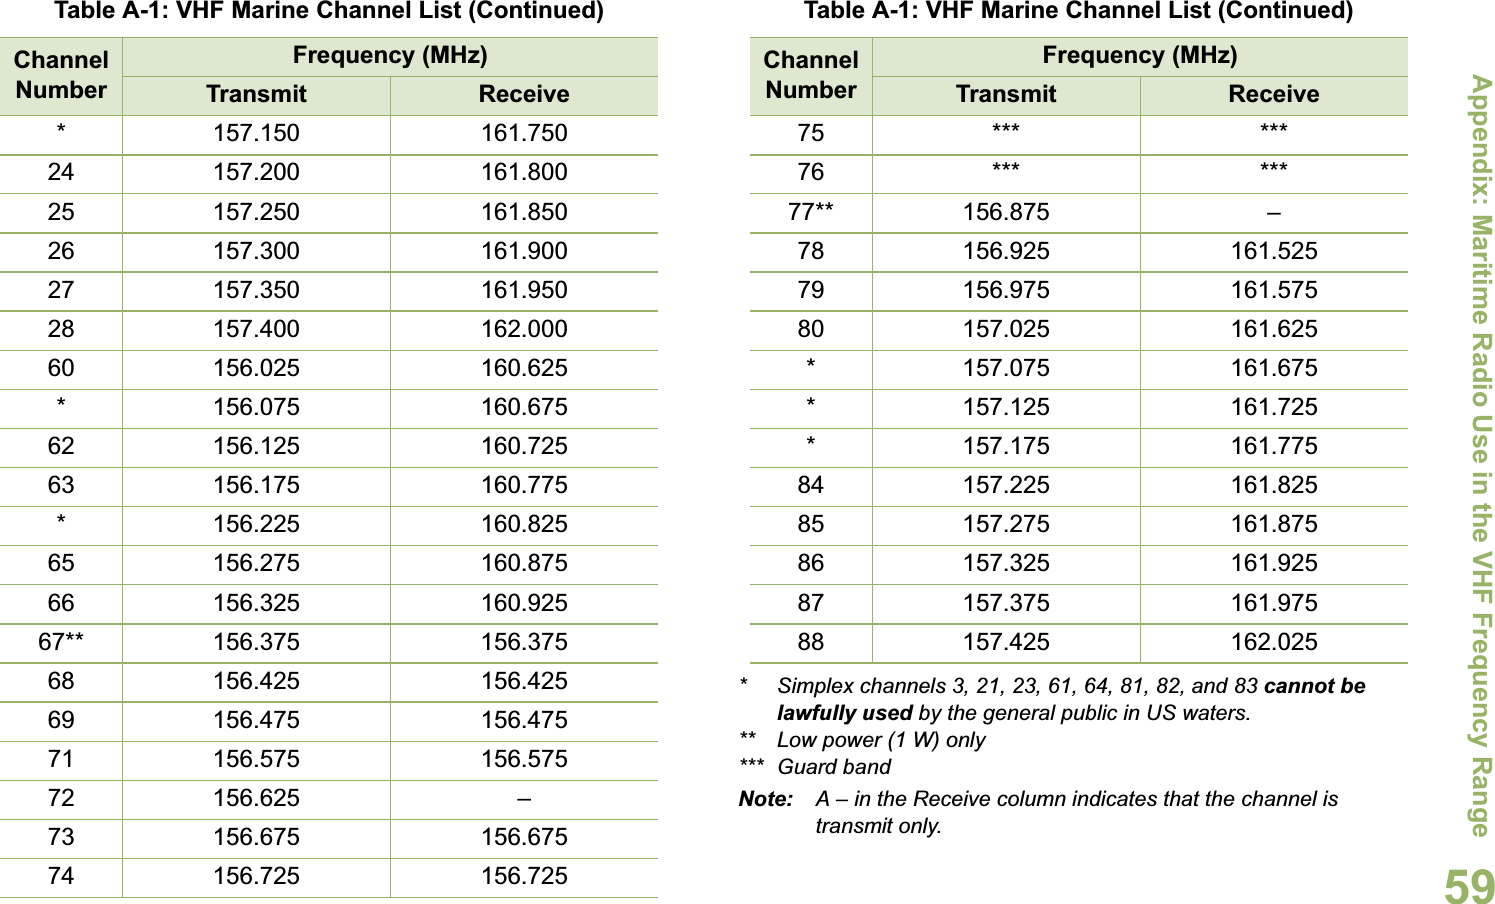 Appendix: Maritime Radio Use in the VHF Frequency RangeEnglish59* Simplex channels 3, 21, 23, 61, 64, 81, 82, and 83 cannot be lawfully used by the general public in US waters.** Low power (1 W) only*** Guard bandNote: A – in the Receive column indicates that the channel is transmit only.* 157.150 161.75024 157.200 161.80025 157.250 161.85026 157.300 161.90027 157.350 161.95028 157.400 162.00060 156.025 160.625* 156.075 160.67562 156.125 160.72563 156.175 160.775* 156.225 160.82565 156.275 160.87566 156.325 160.92567** 156.375 156.37568 156.425 156.42569 156.475 156.47571 156.575 156.57572 156.625 –73 156.675 156.67574 156.725 156.725Table A-1: VHF Marine Channel List (Continued)Channel NumberFrequency (MHz)Transmit Receive75 *** ***76 *** ***77** 156.875 –78 156.925 161.52579 156.975 161.57580 157.025 161.625* 157.075 161.675* 157.125 161.725* 157.175 161.77584 157.225 161.82585 157.275 161.87586 157.325 161.92587 157.375 161.97588 157.425 162.025Table A-1: VHF Marine Channel List (Continued)Channel NumberFrequency (MHz)Transmit Receive